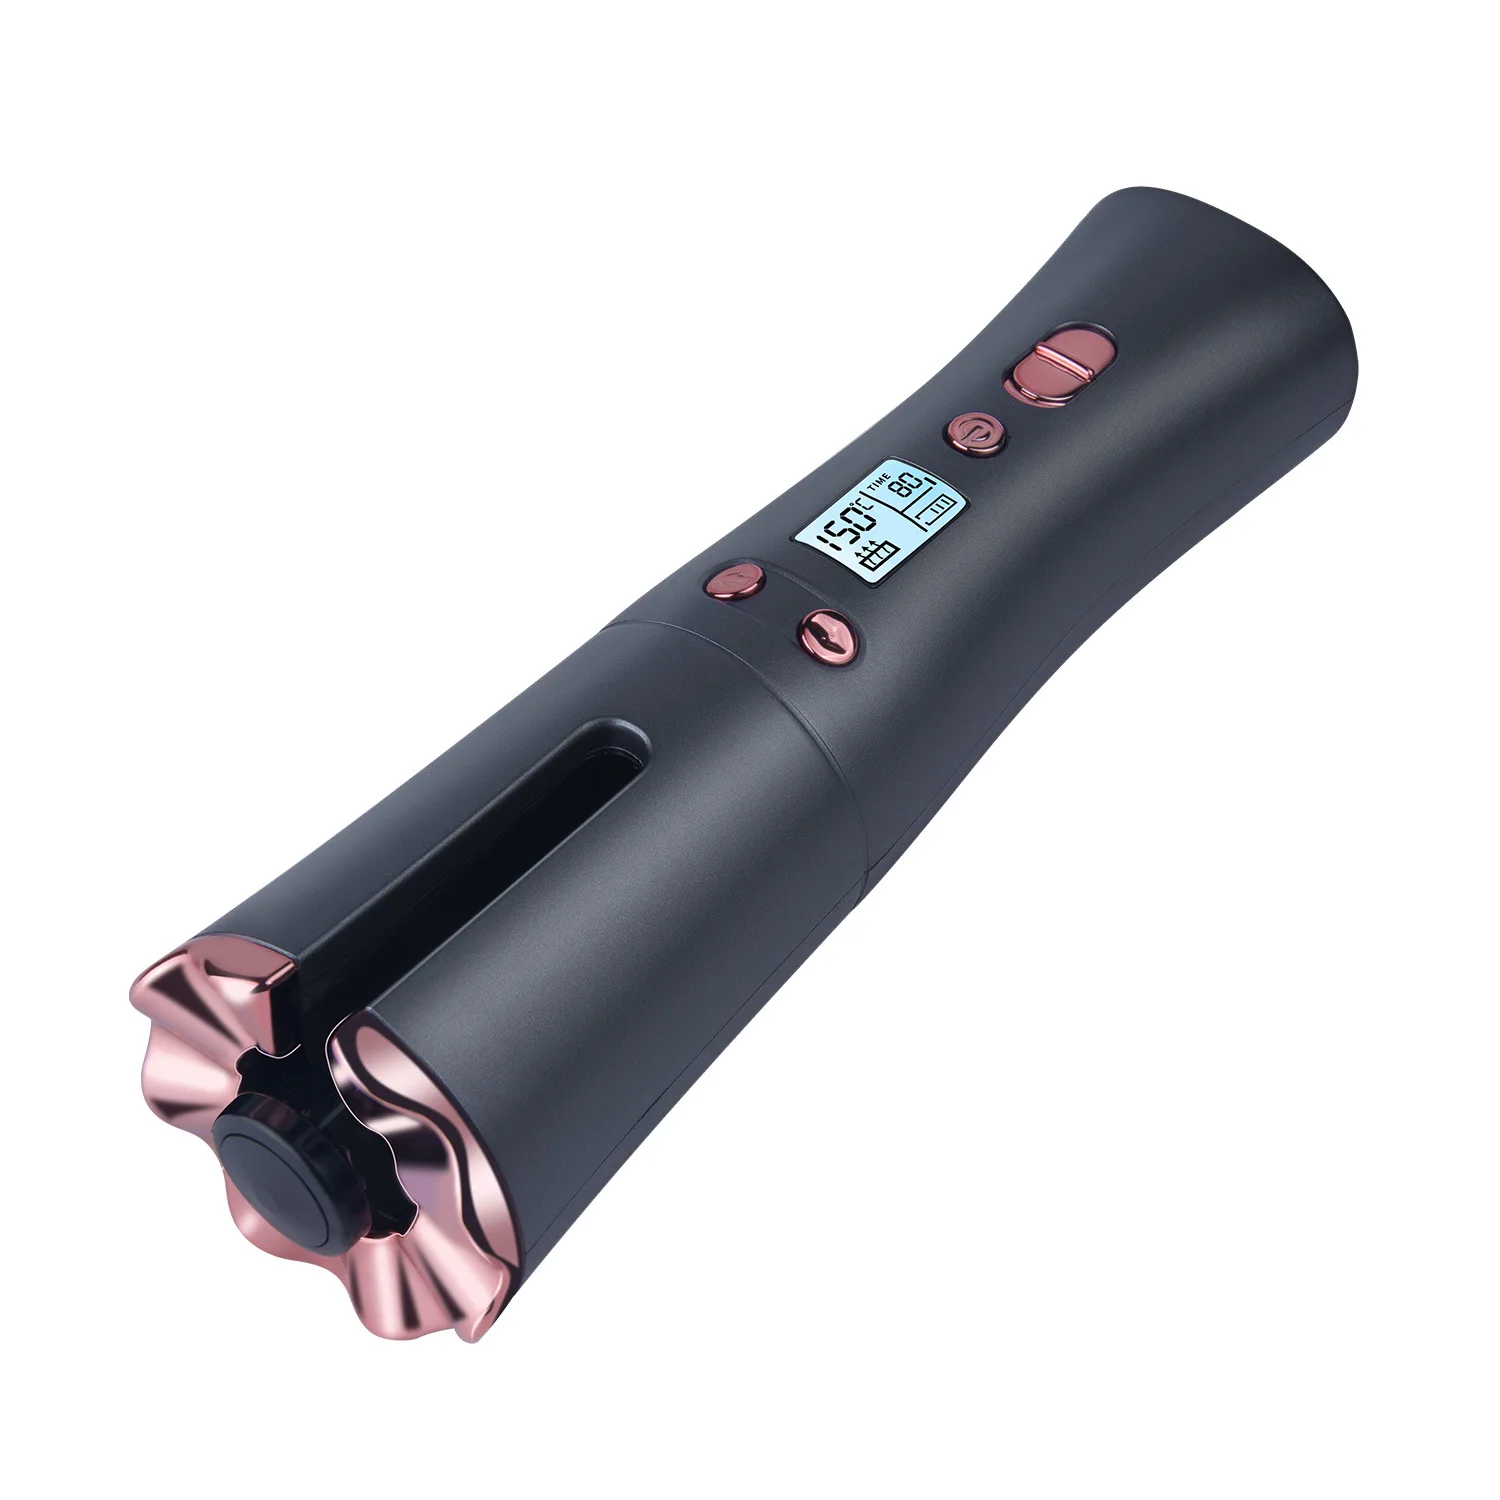 H14b842f775e34eab8367673c8a5a7132S Automatic Hair Crimper USB Cordless Hair Curler Curling Iron Wand Auto Ceramic Hair Waver Professional Hair Styling Tools 2021